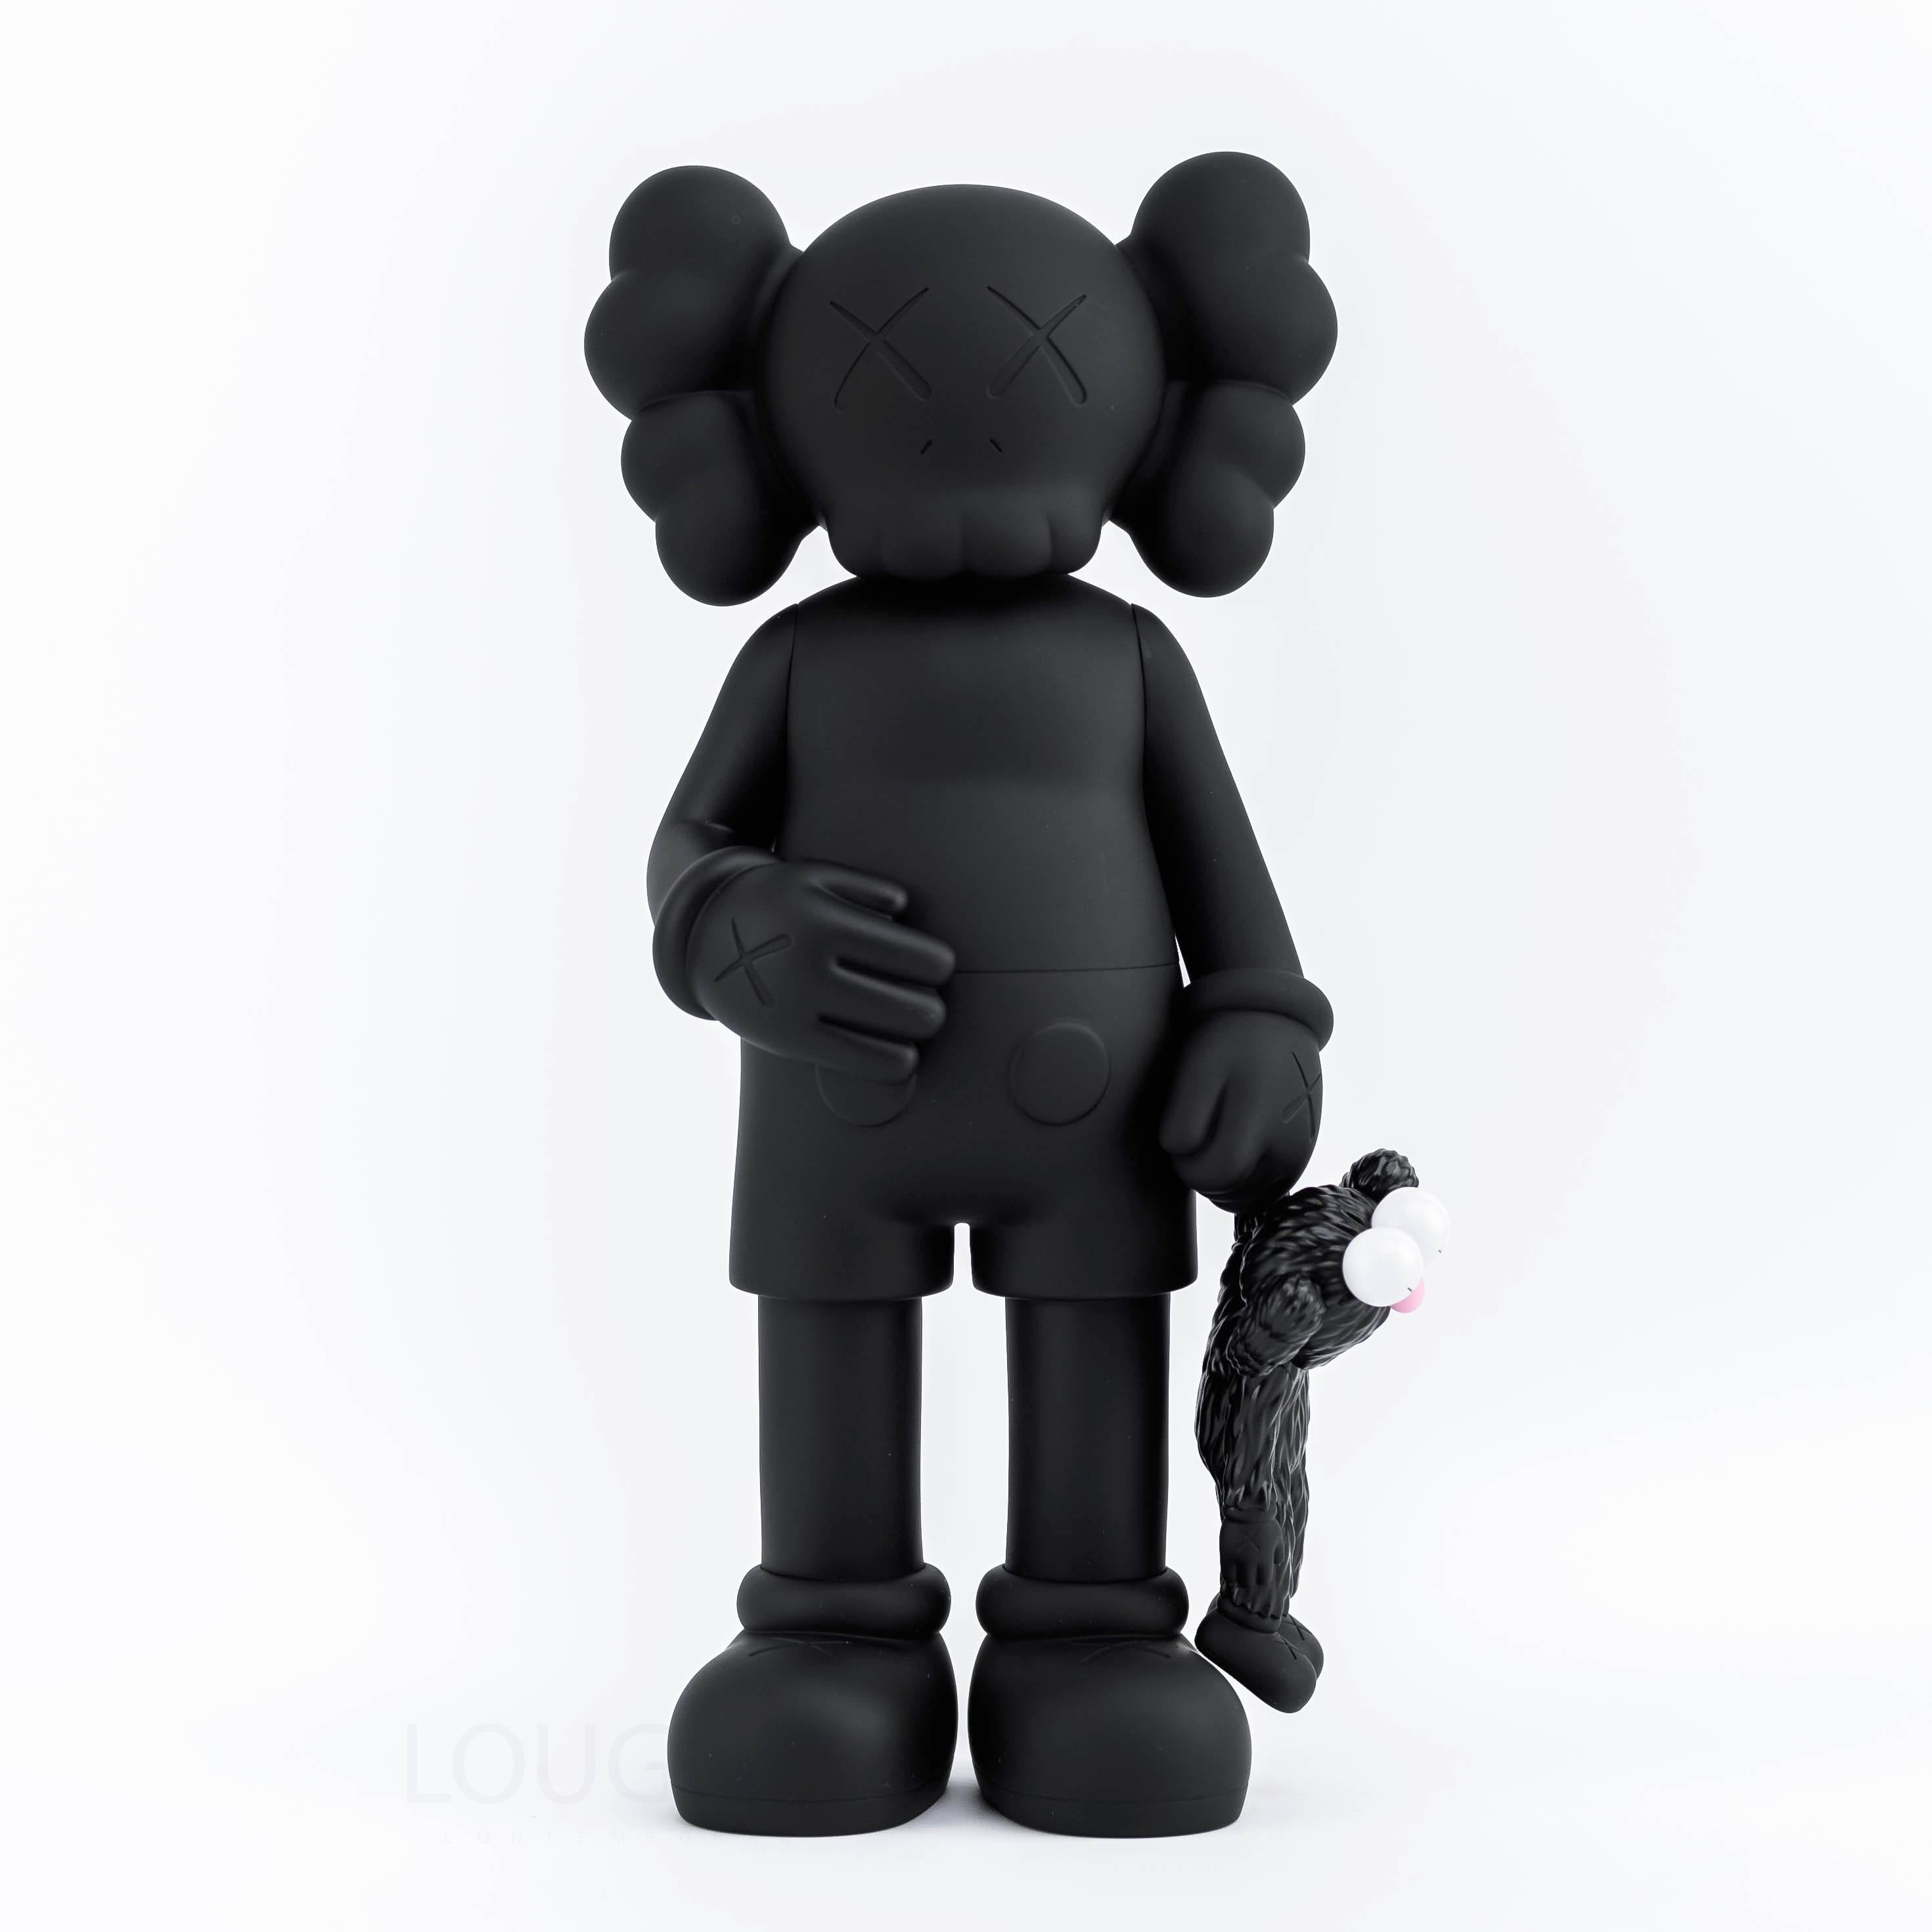 Share (Black) - Sculpture by KAWS